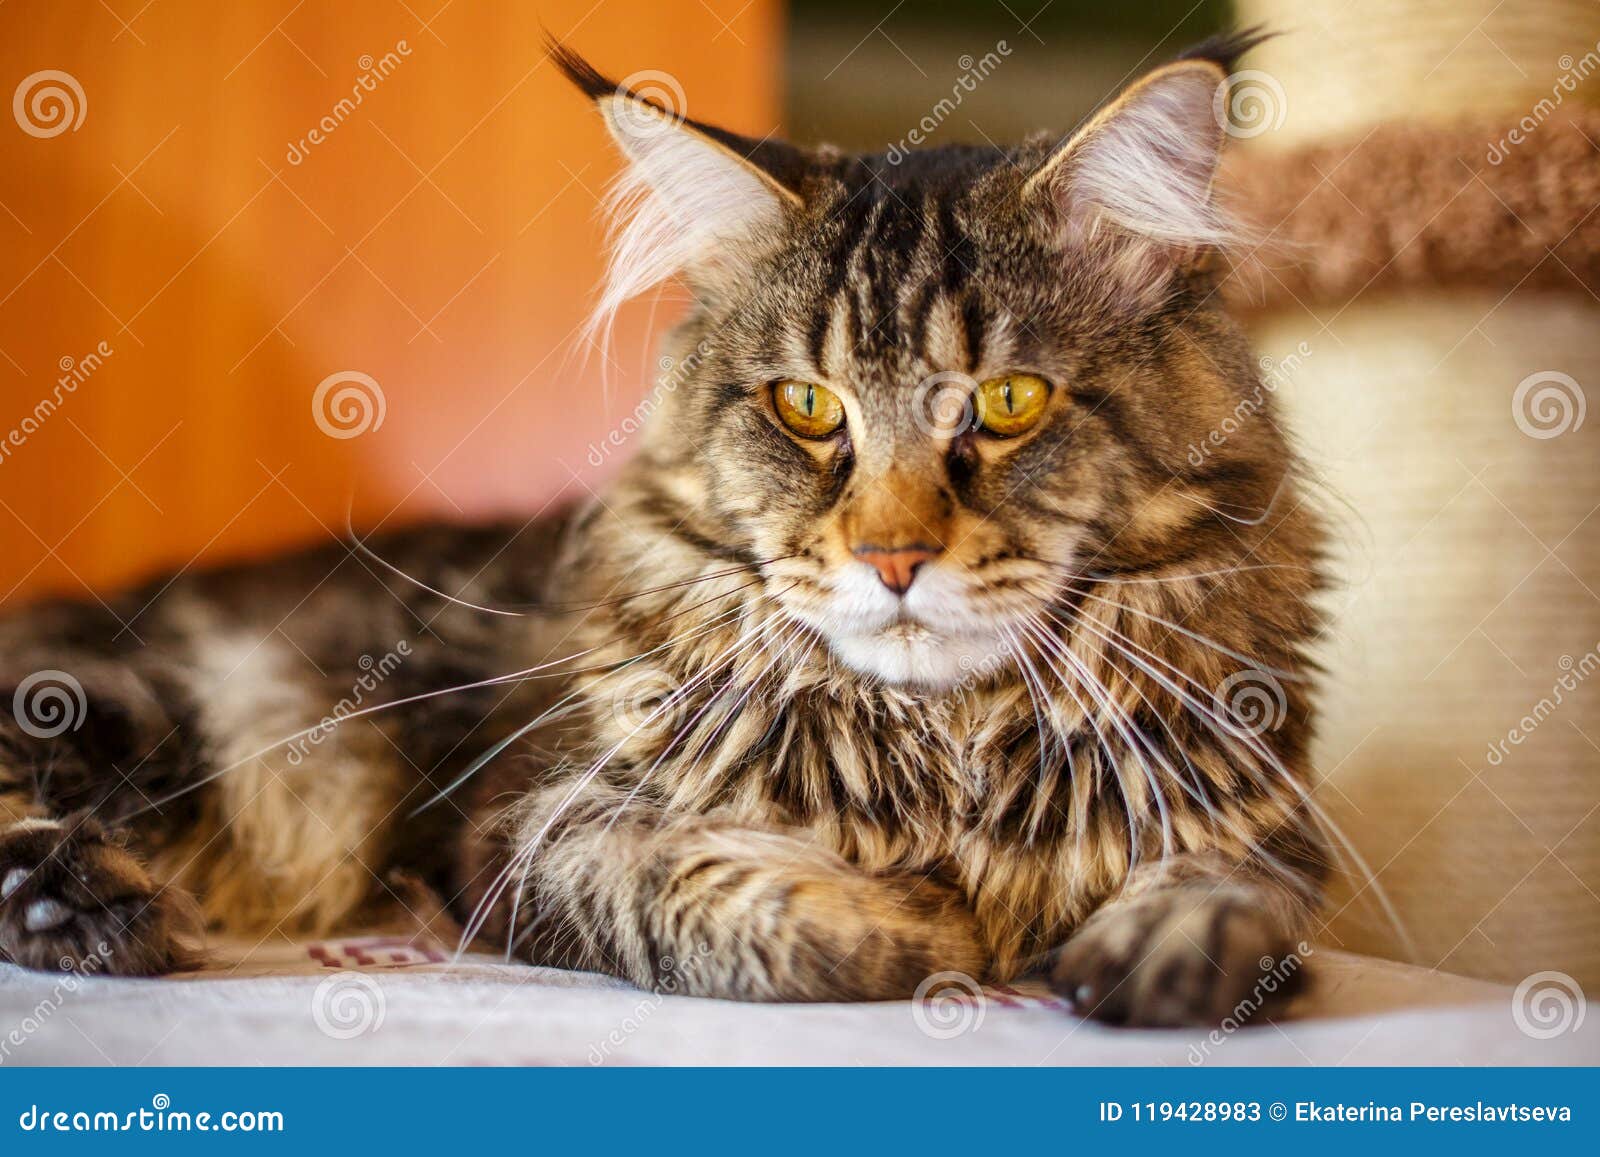 Beautiful Multi Colored Home Cat Sitting Pets Breed Maine Coon Stock Image Image Of Kitten Brown 119428983